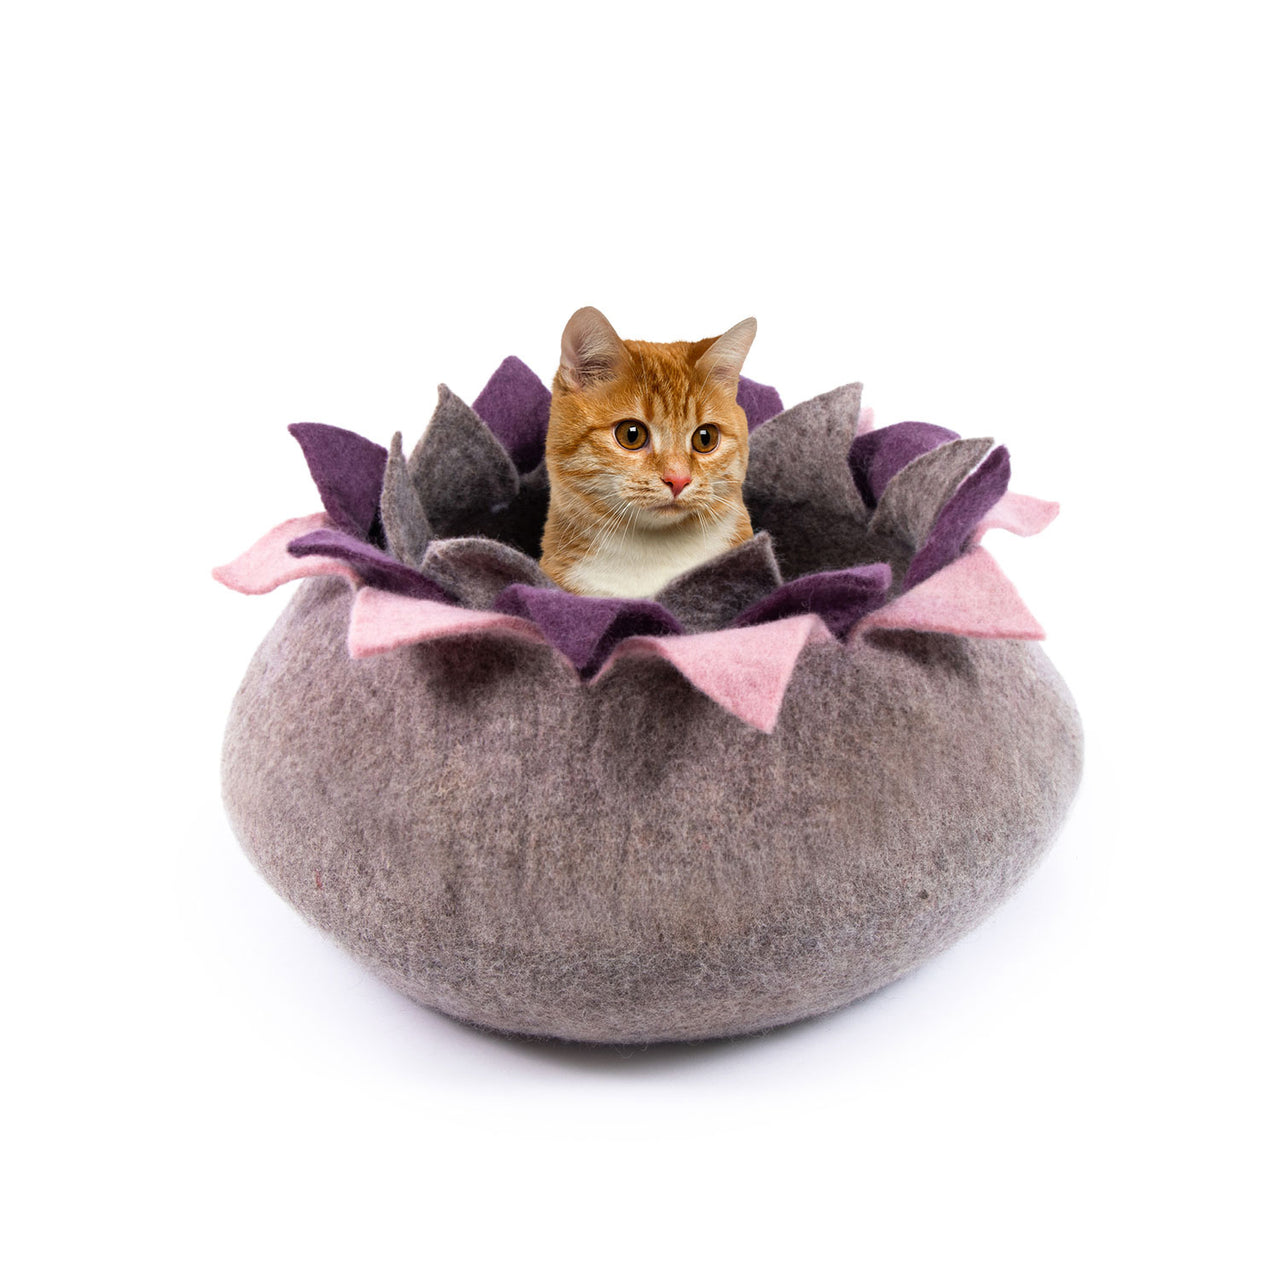 Handcrafted felt cat bed